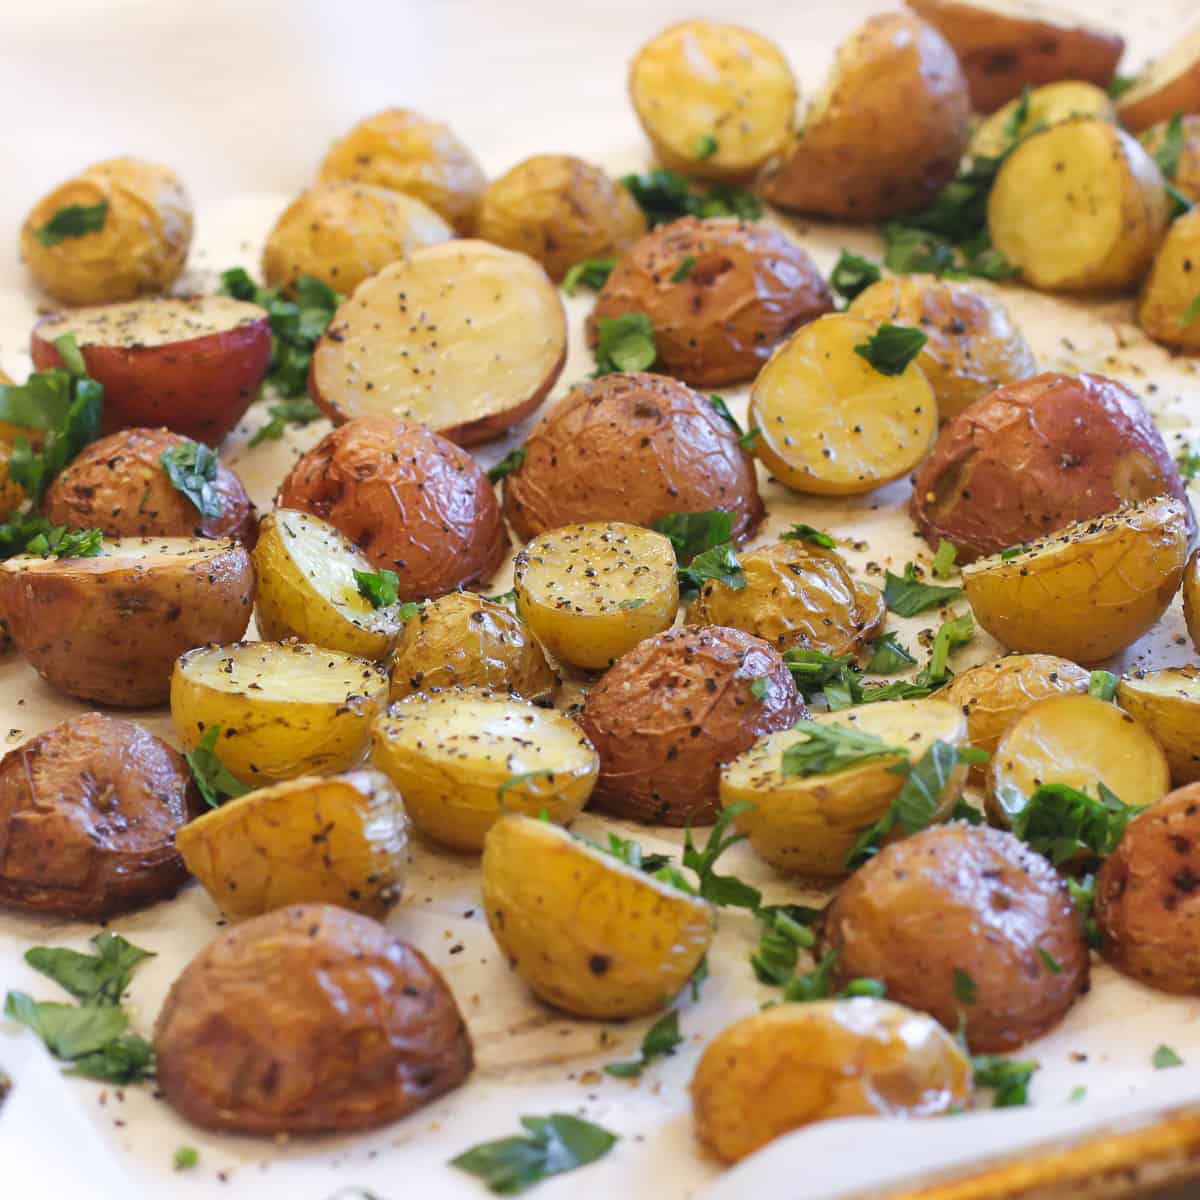 https://www.theblackpeppercorn.com/wp-content/uploads/2020/04/Oven-Roasted-Baby-Potatoes-square.jpg